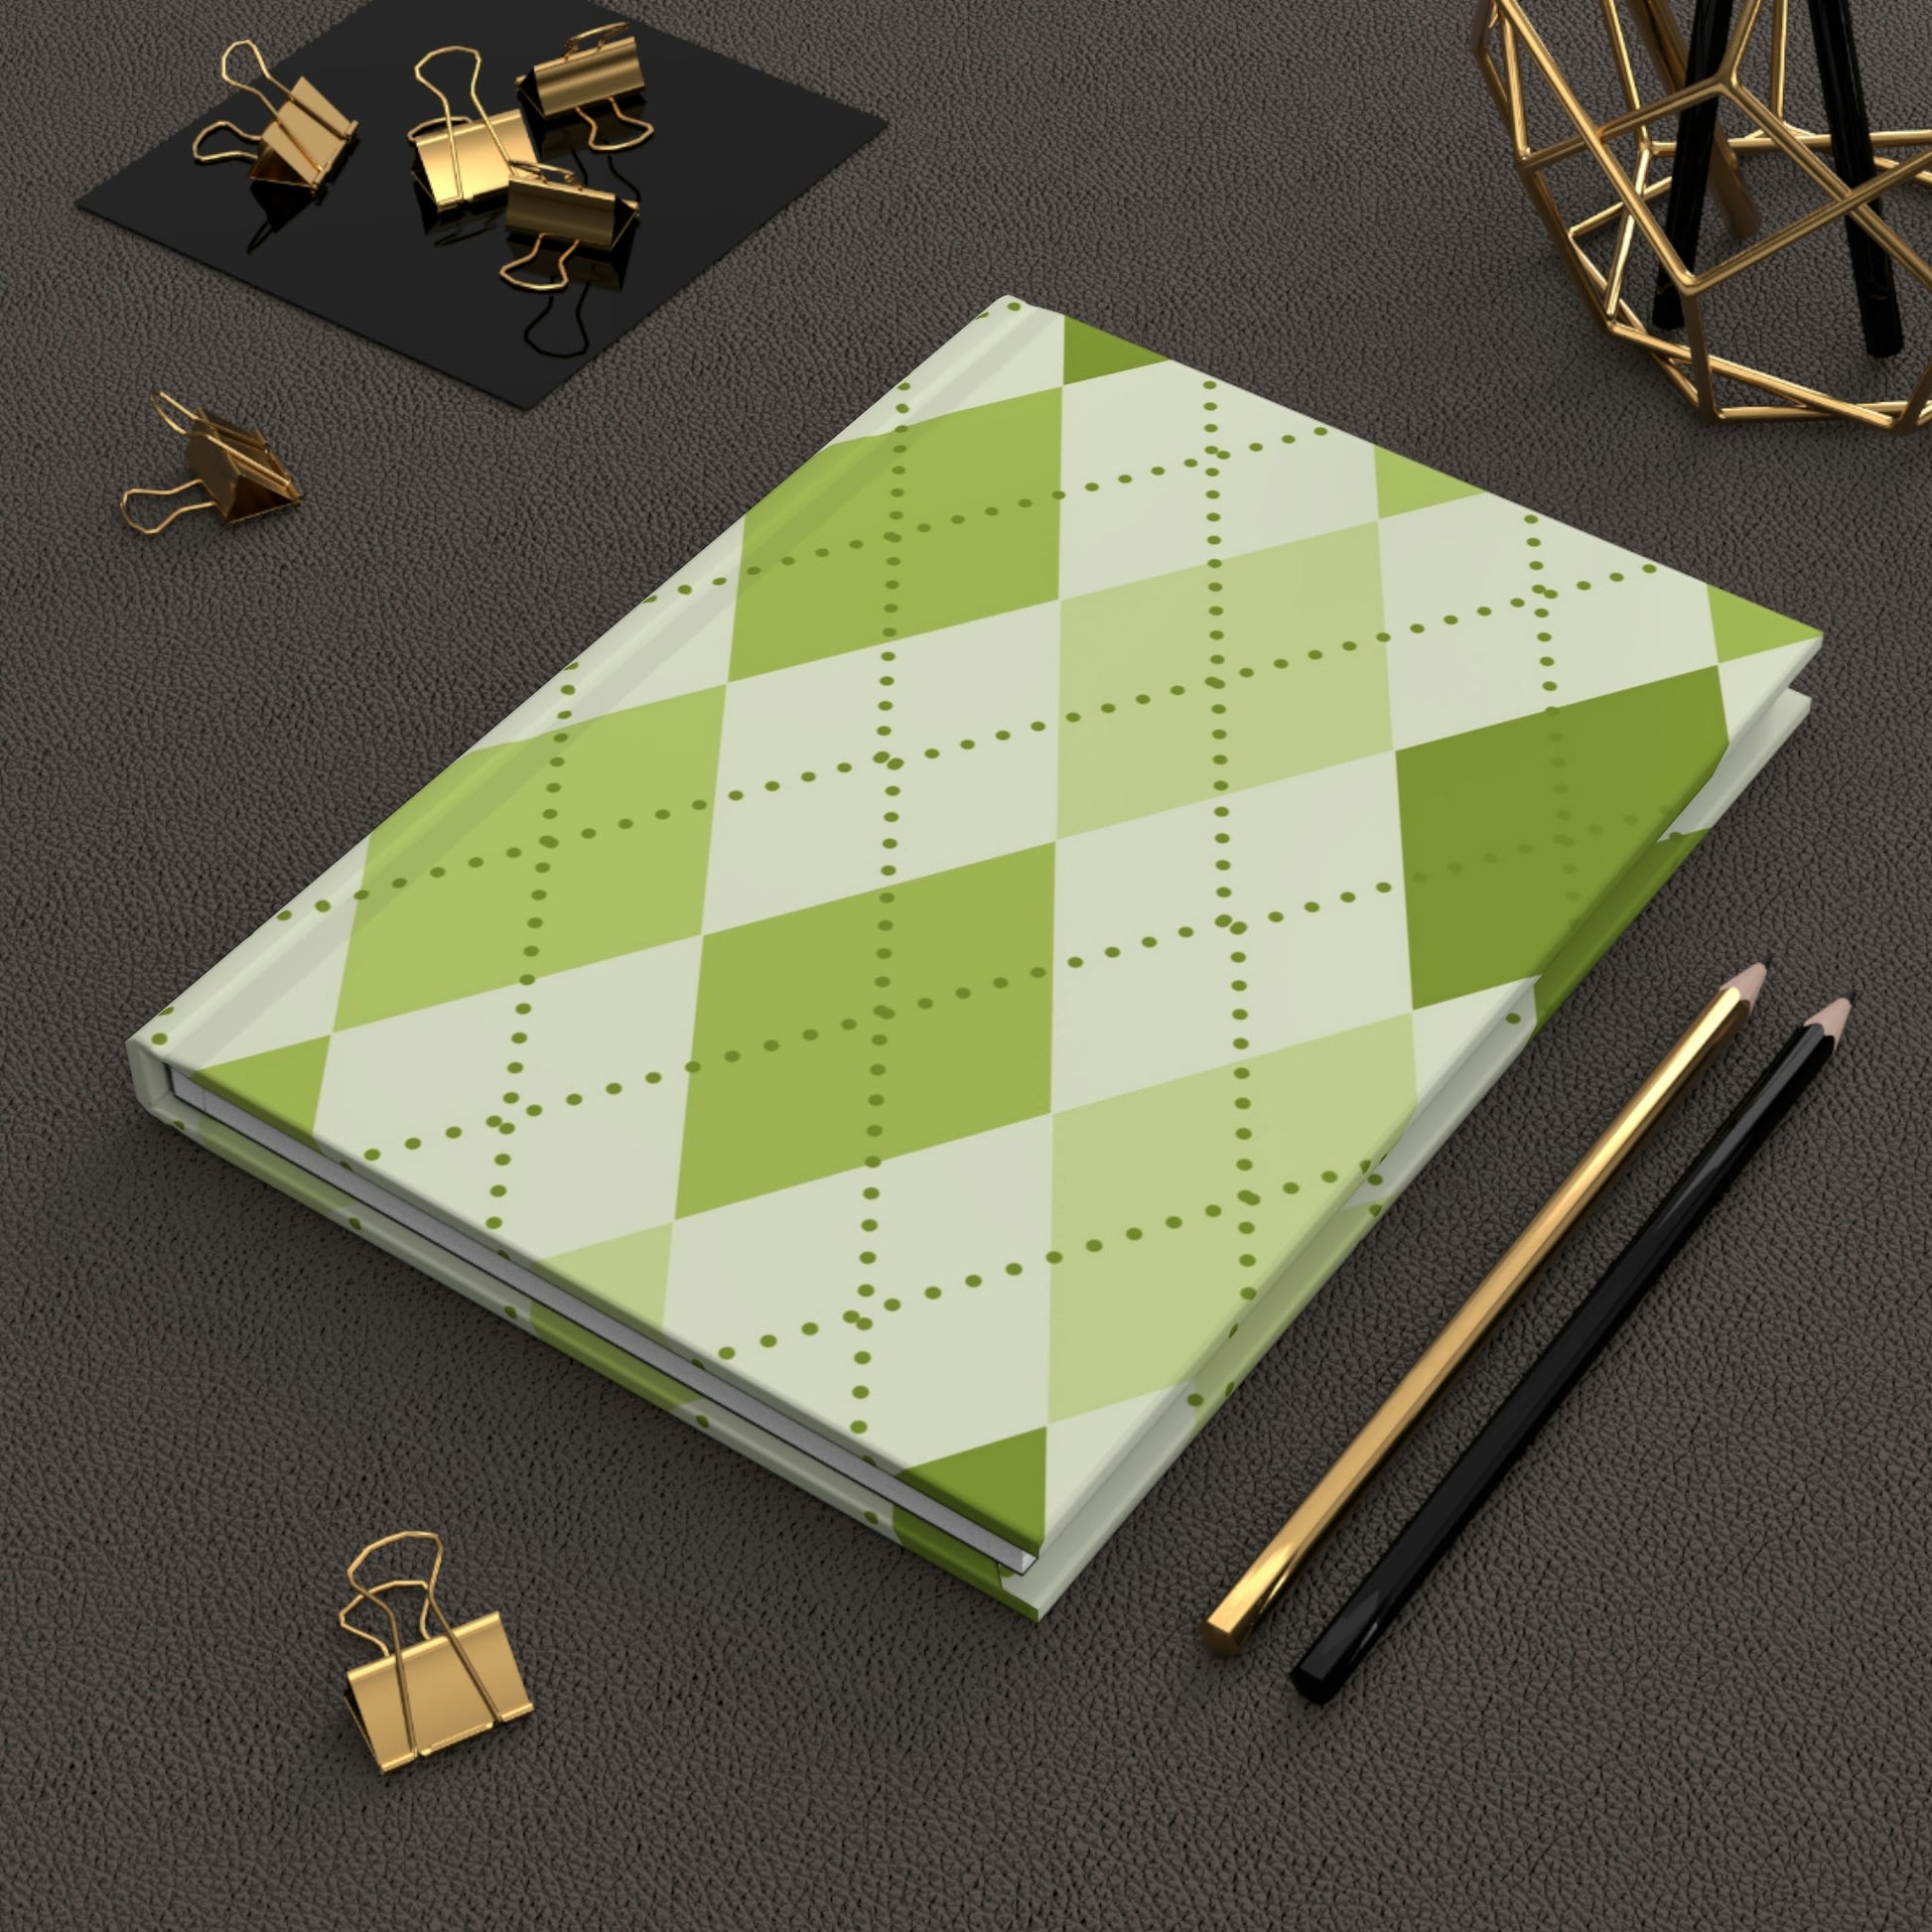 Green Argyle Hardcover Matte Journal Paper products Pink Sweetheart